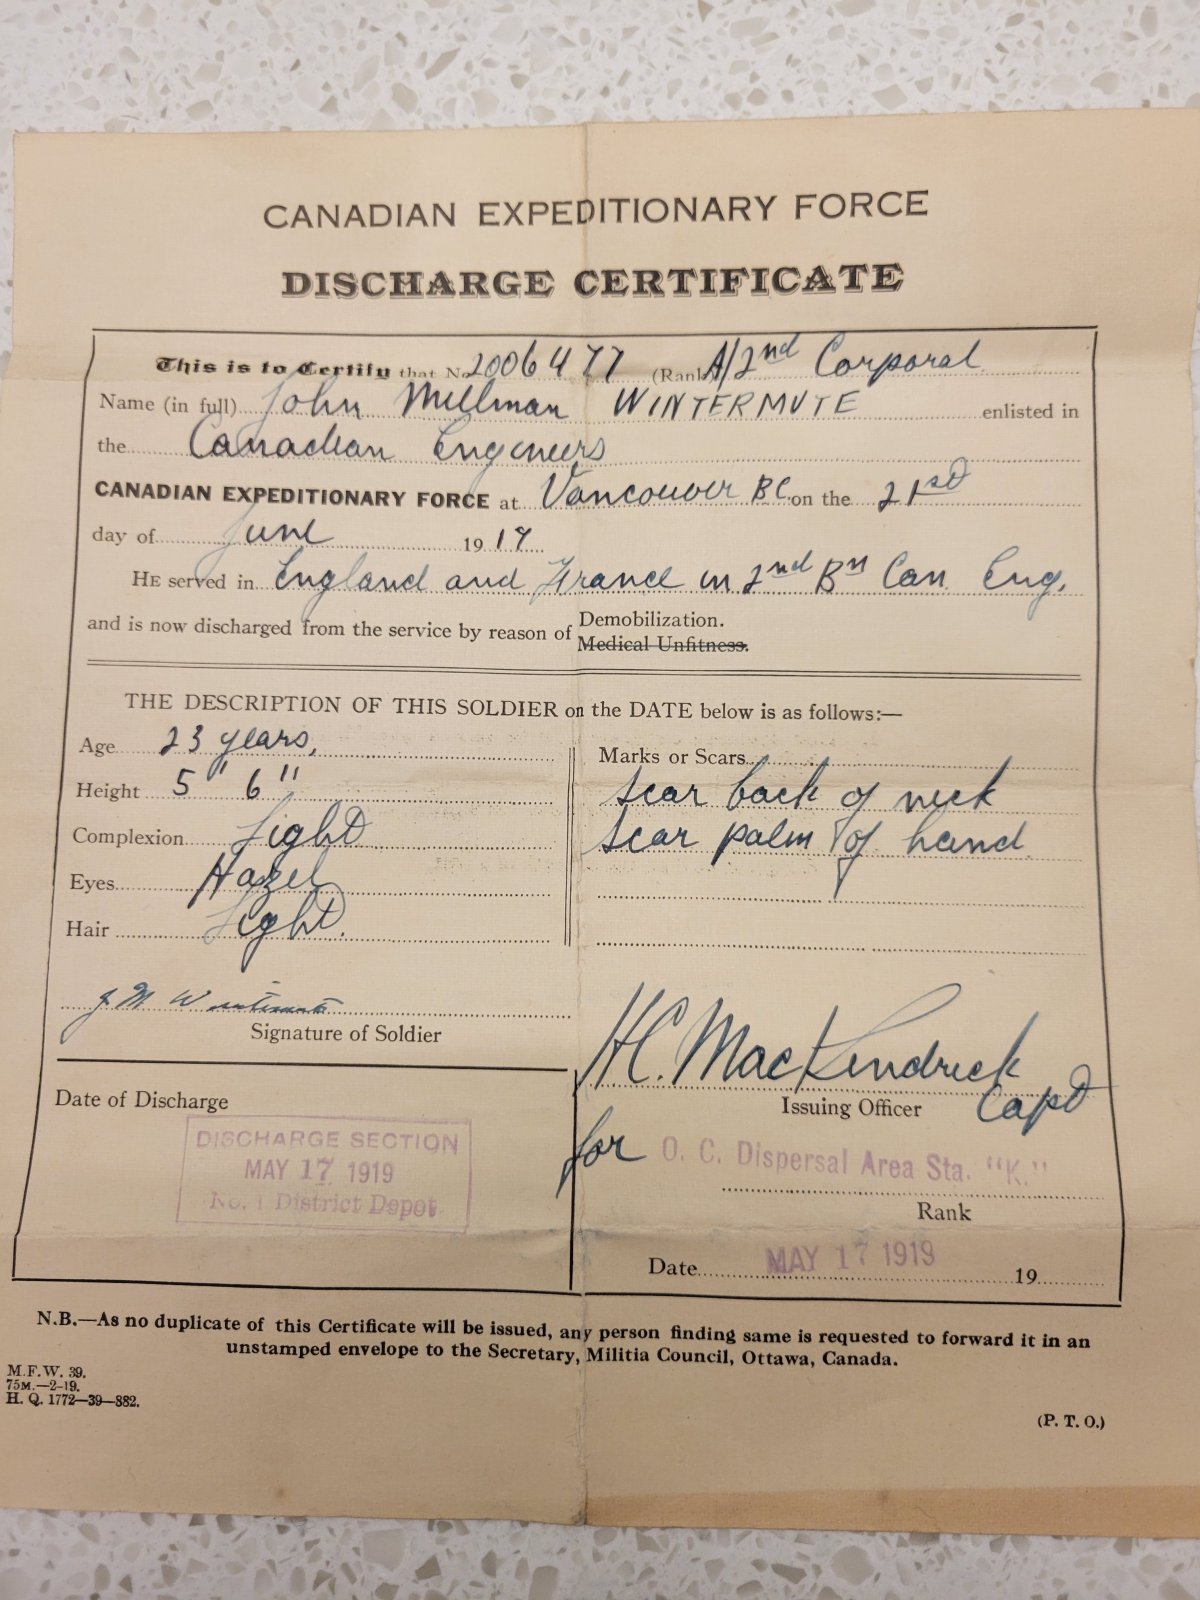 The Discharge Certificate of Corporal John Milliman Wintermute who served in both England and France and was discharged on May 17, 1919 .